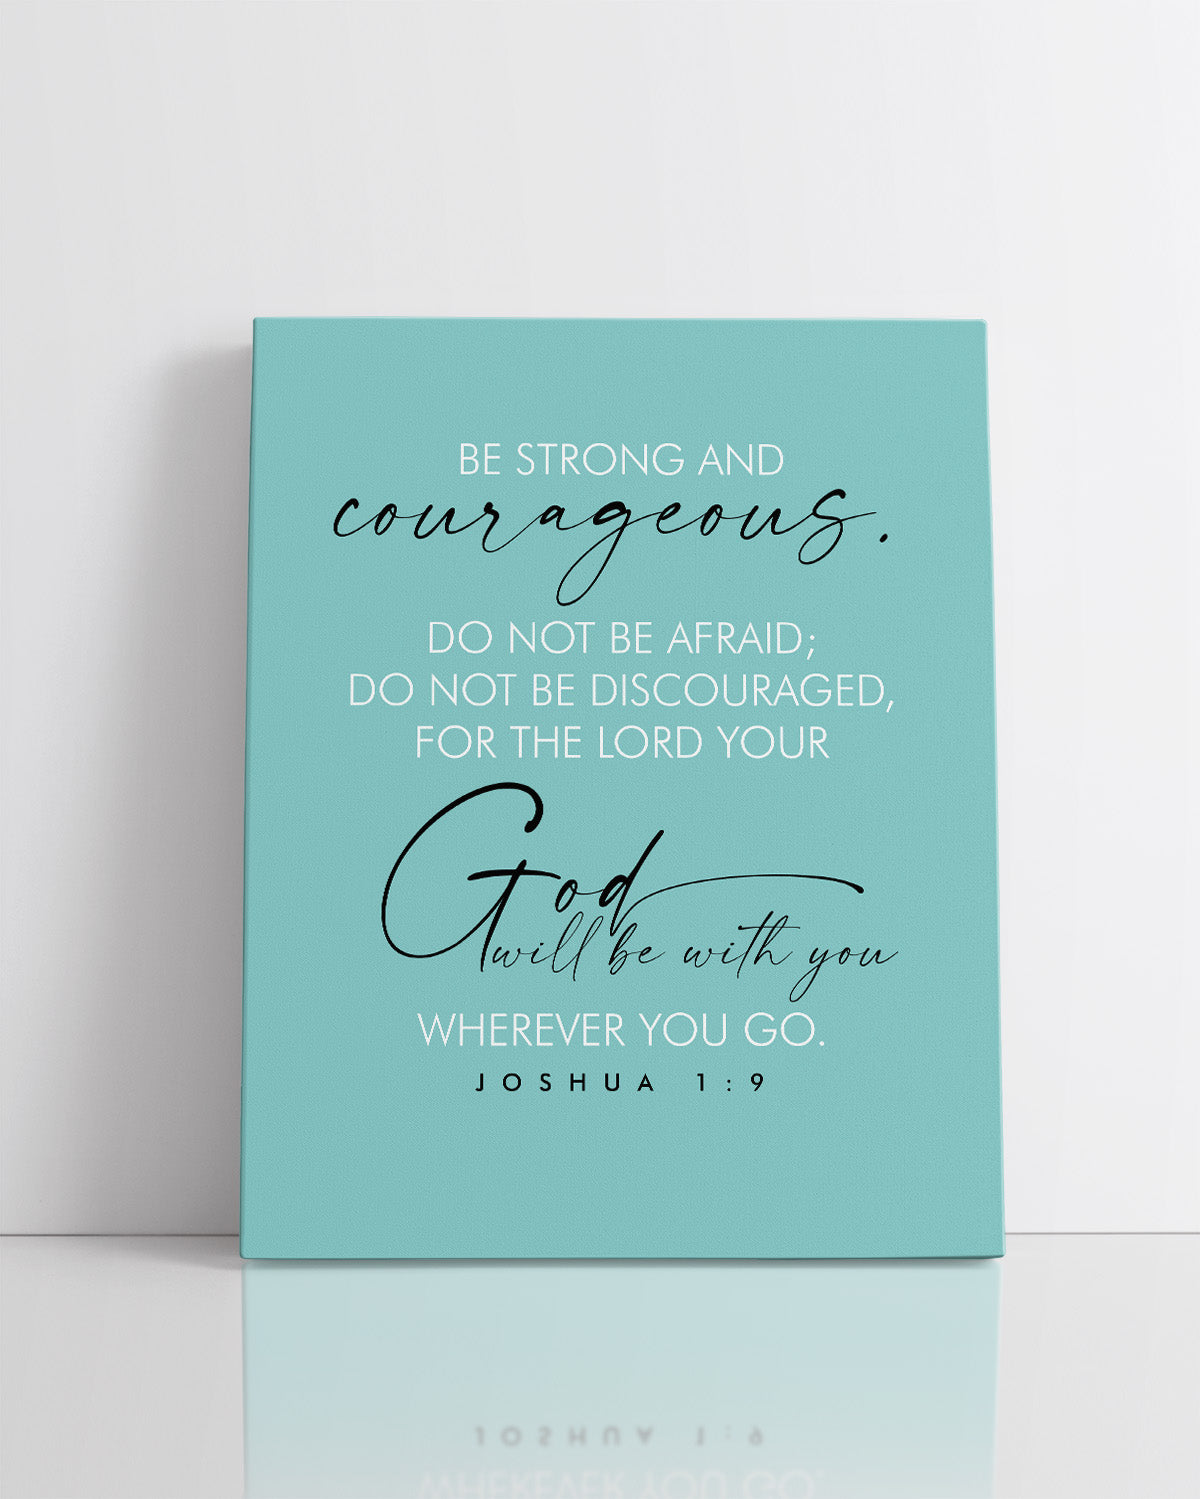 Christian Gifts for Women - Religious Room Decor - Bible Verses Wall Art - Turquoise Blue Spiritual Gifts - Inspirational Quotes - Joshua 1:9 Home Kitchen Bedroom Decor